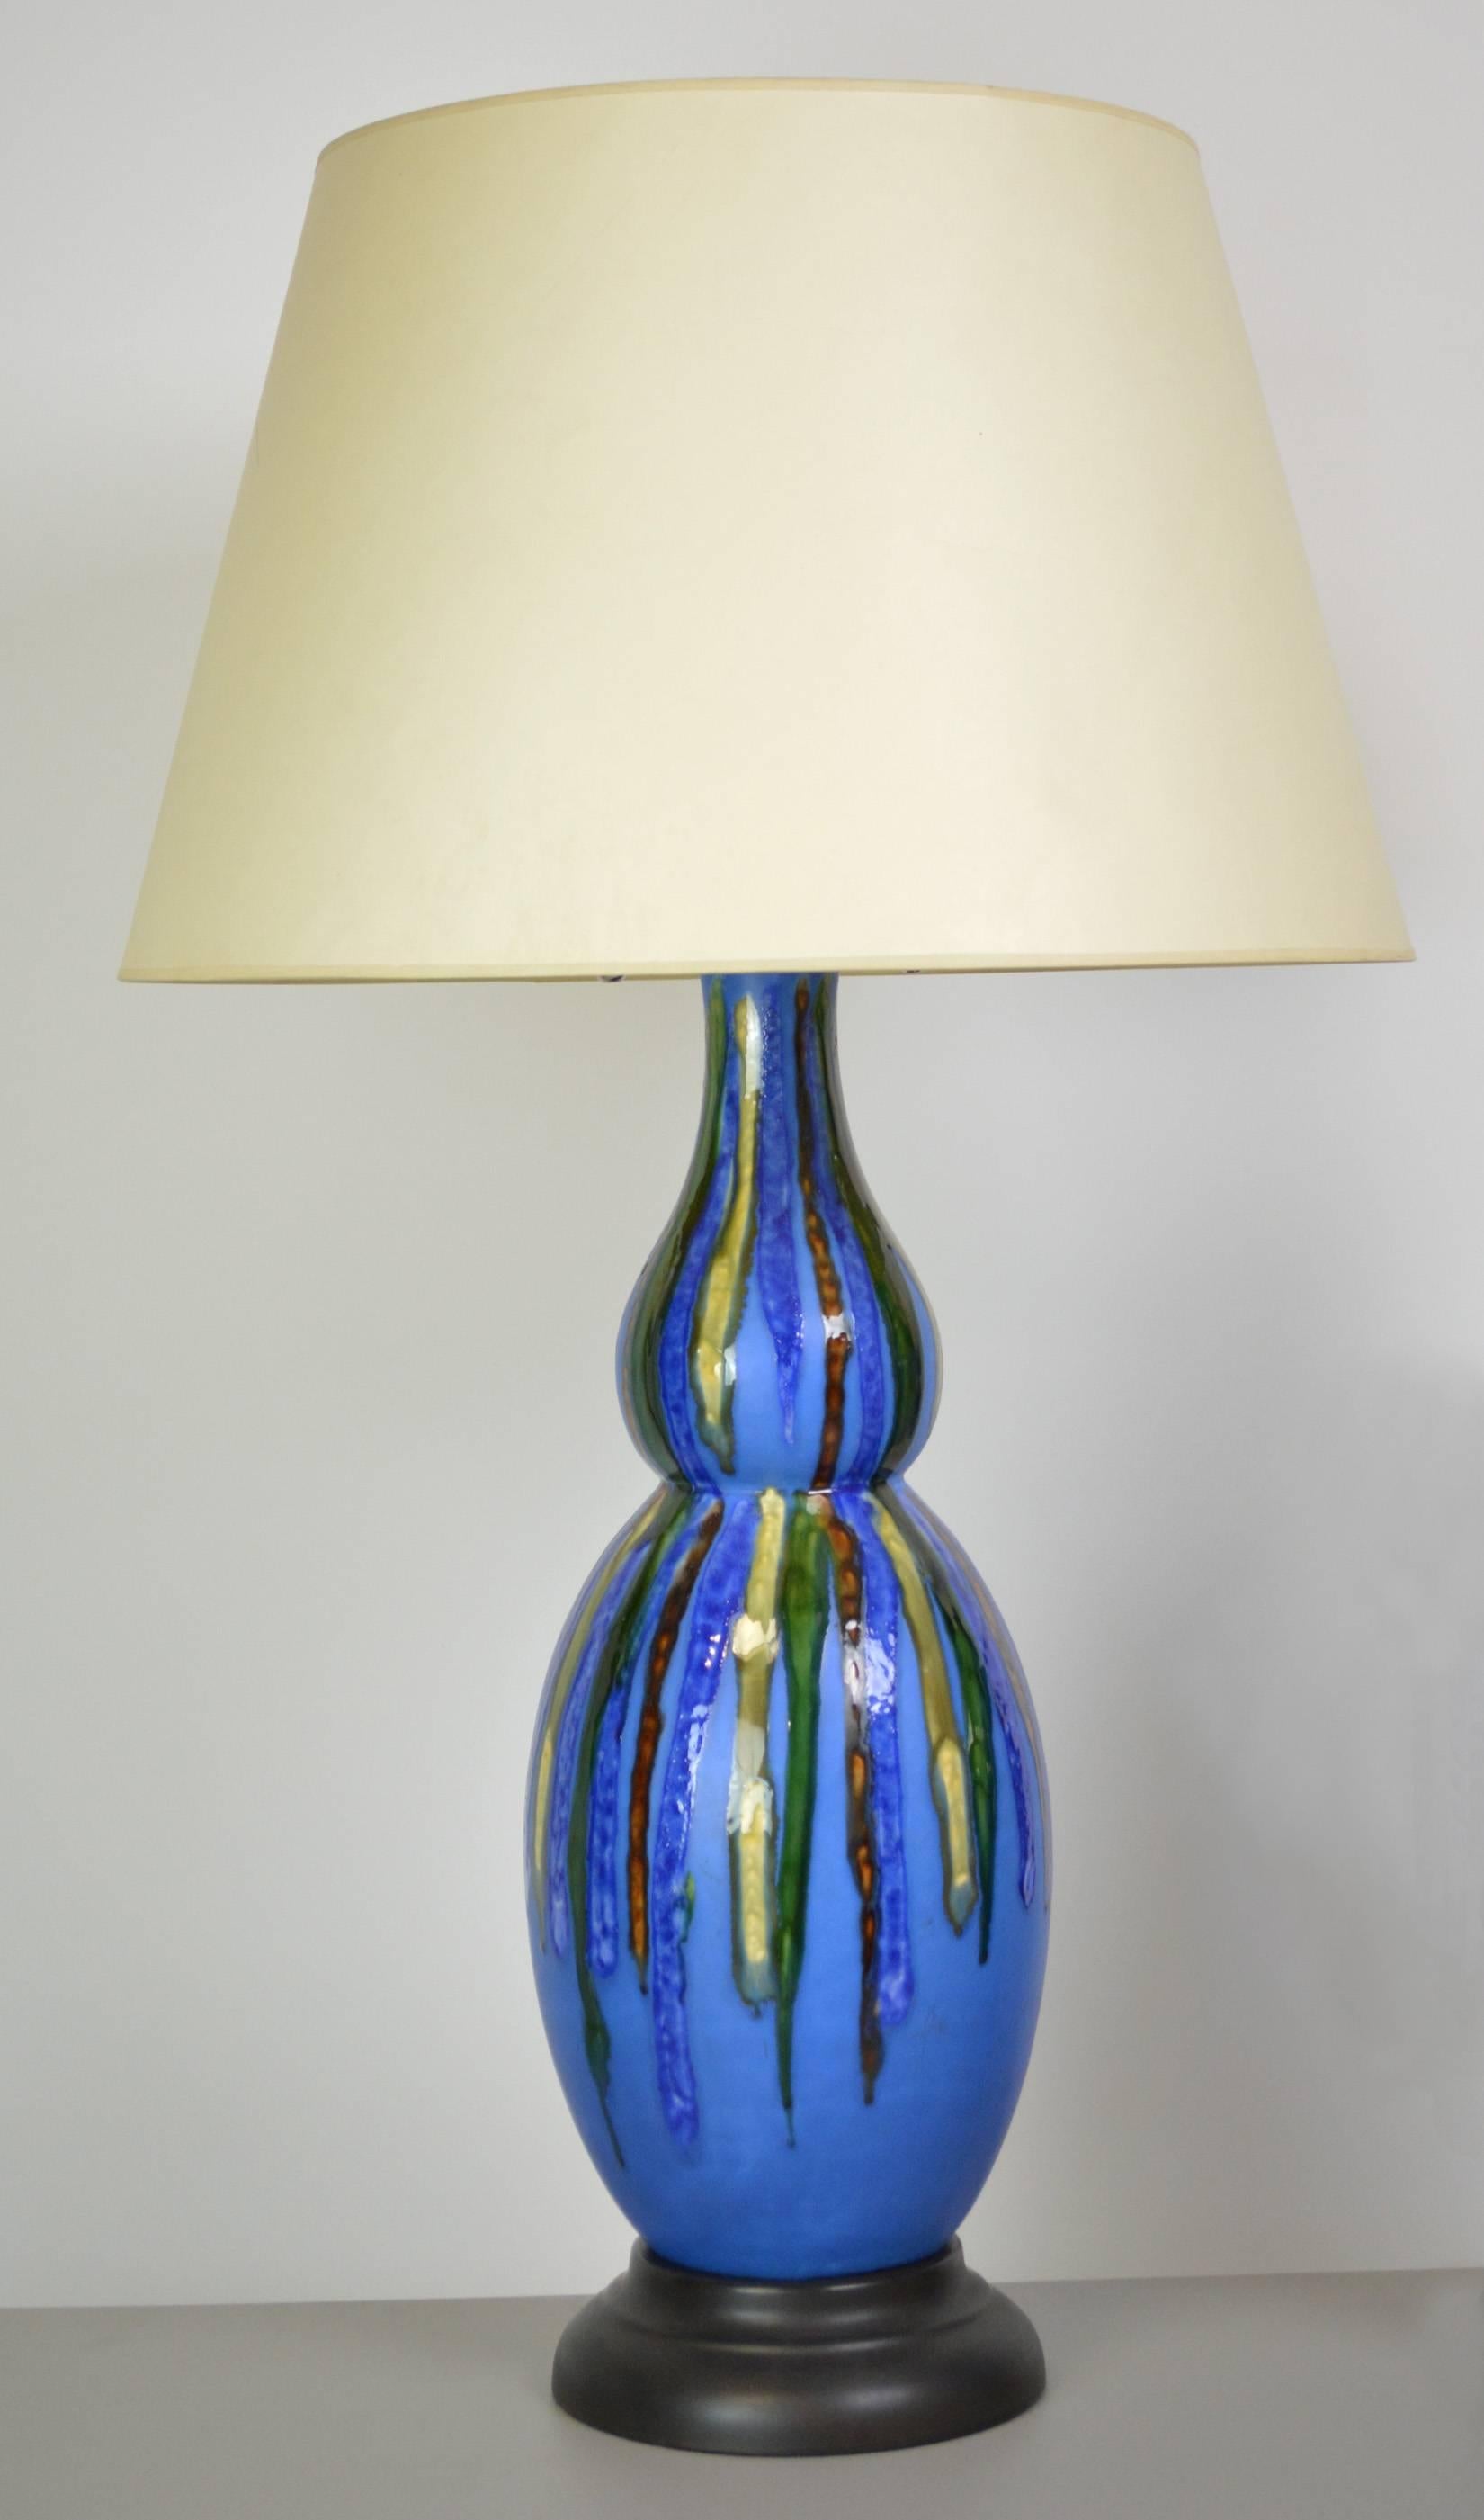 A pair of Mid-Century Modern double gourd lamps with a deep blue matte glaze, with drip glaze decoration in red, yellow and green. Boho chic style perfect for your colorful interior. Newly rewired with double cluster sockets and French braid cloth